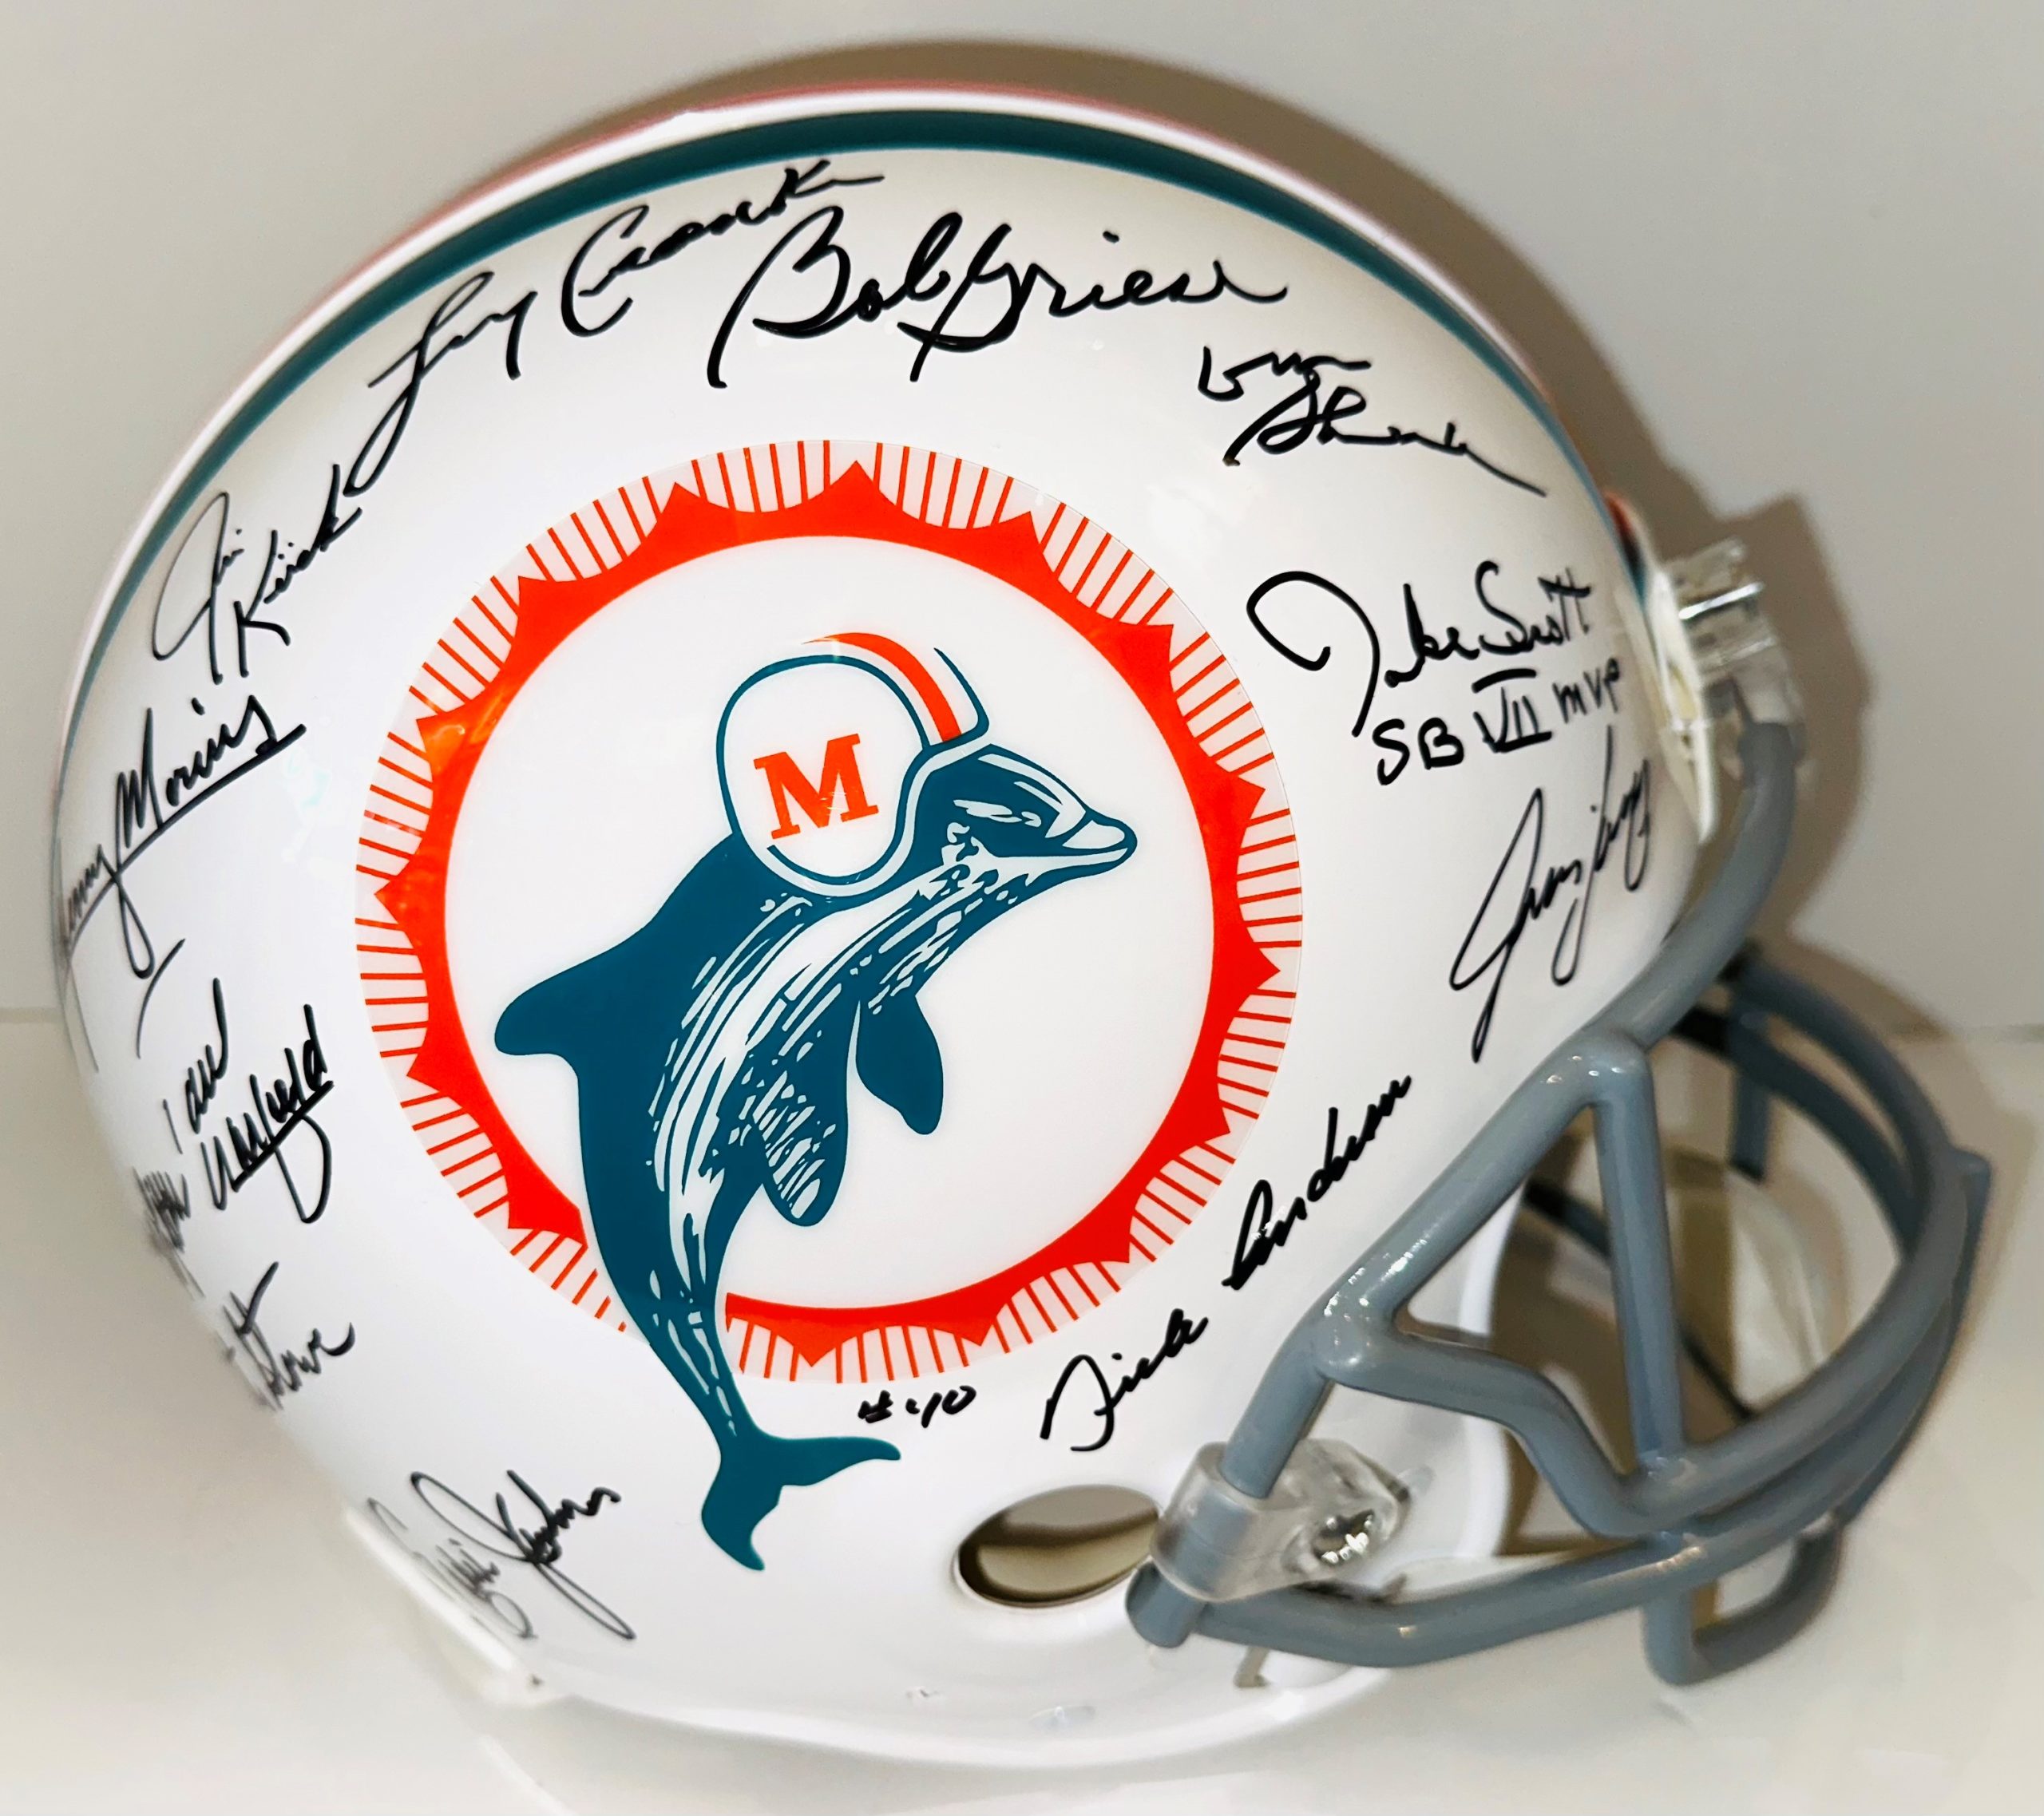 1972 Miami Dolphins Team Autographed Full Size Authentic Proline